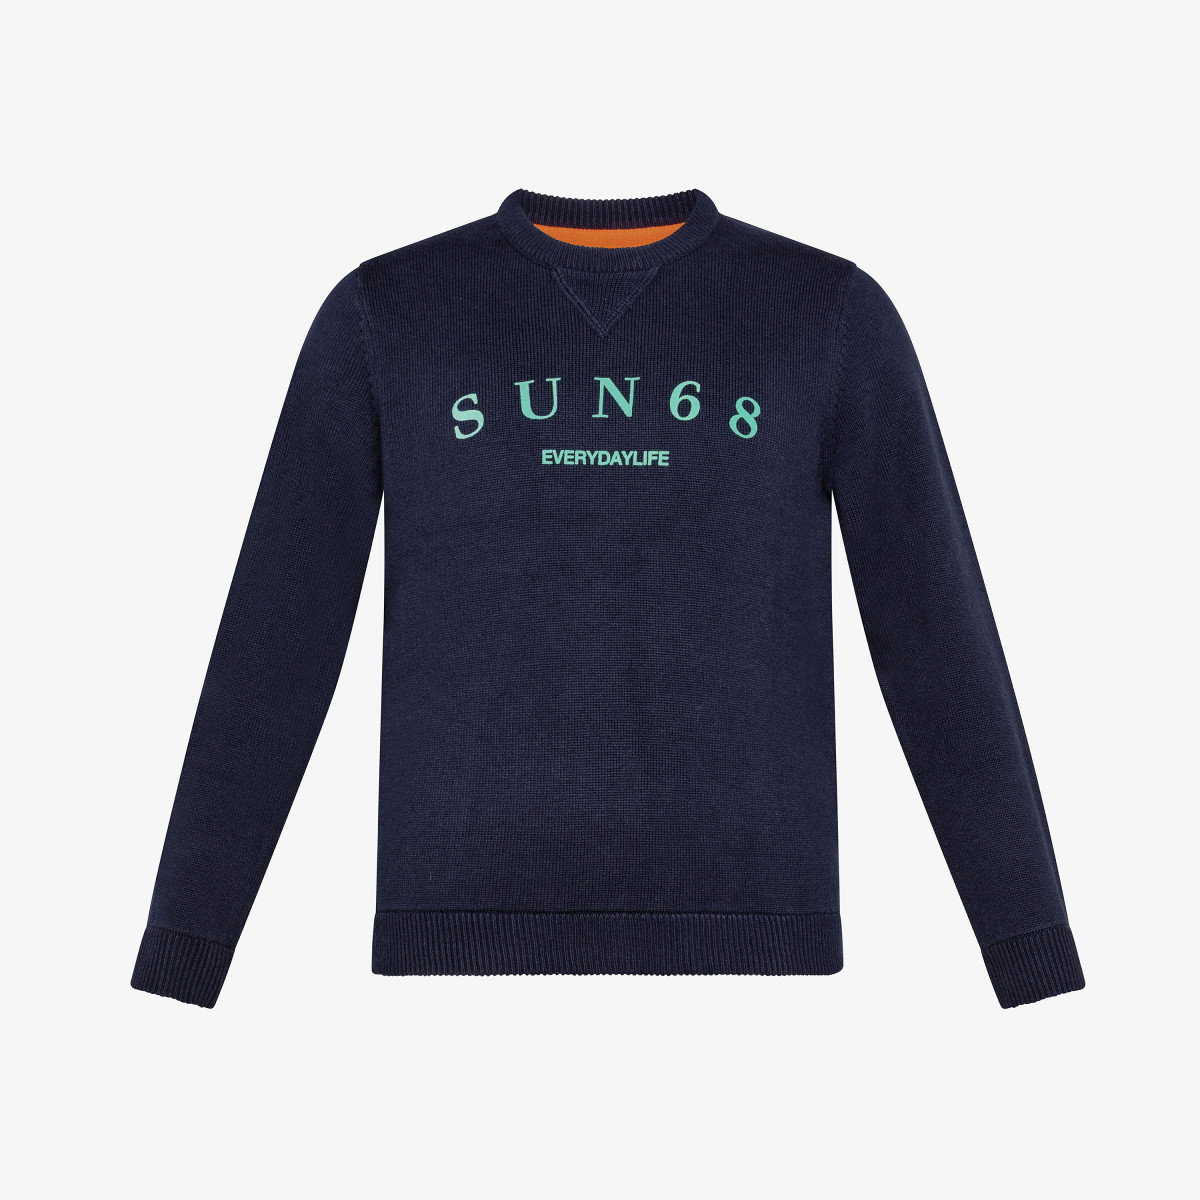 BOY'S ROUND LETTERING ON CHEST NAVY BLUE